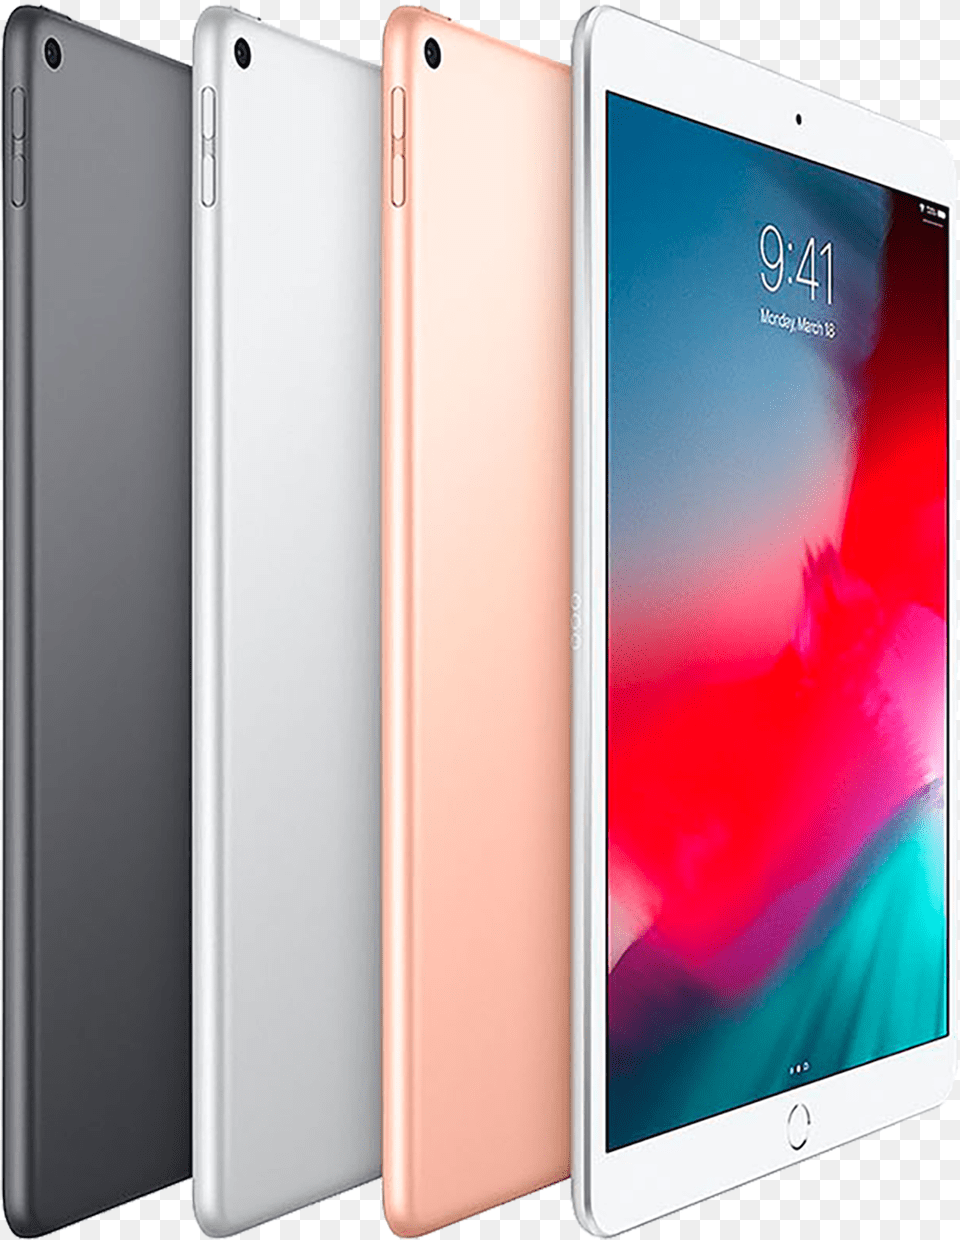 Product Ipad Price In Malaysia 2019, Electronics, Mobile Phone, Phone, Computer Png Image